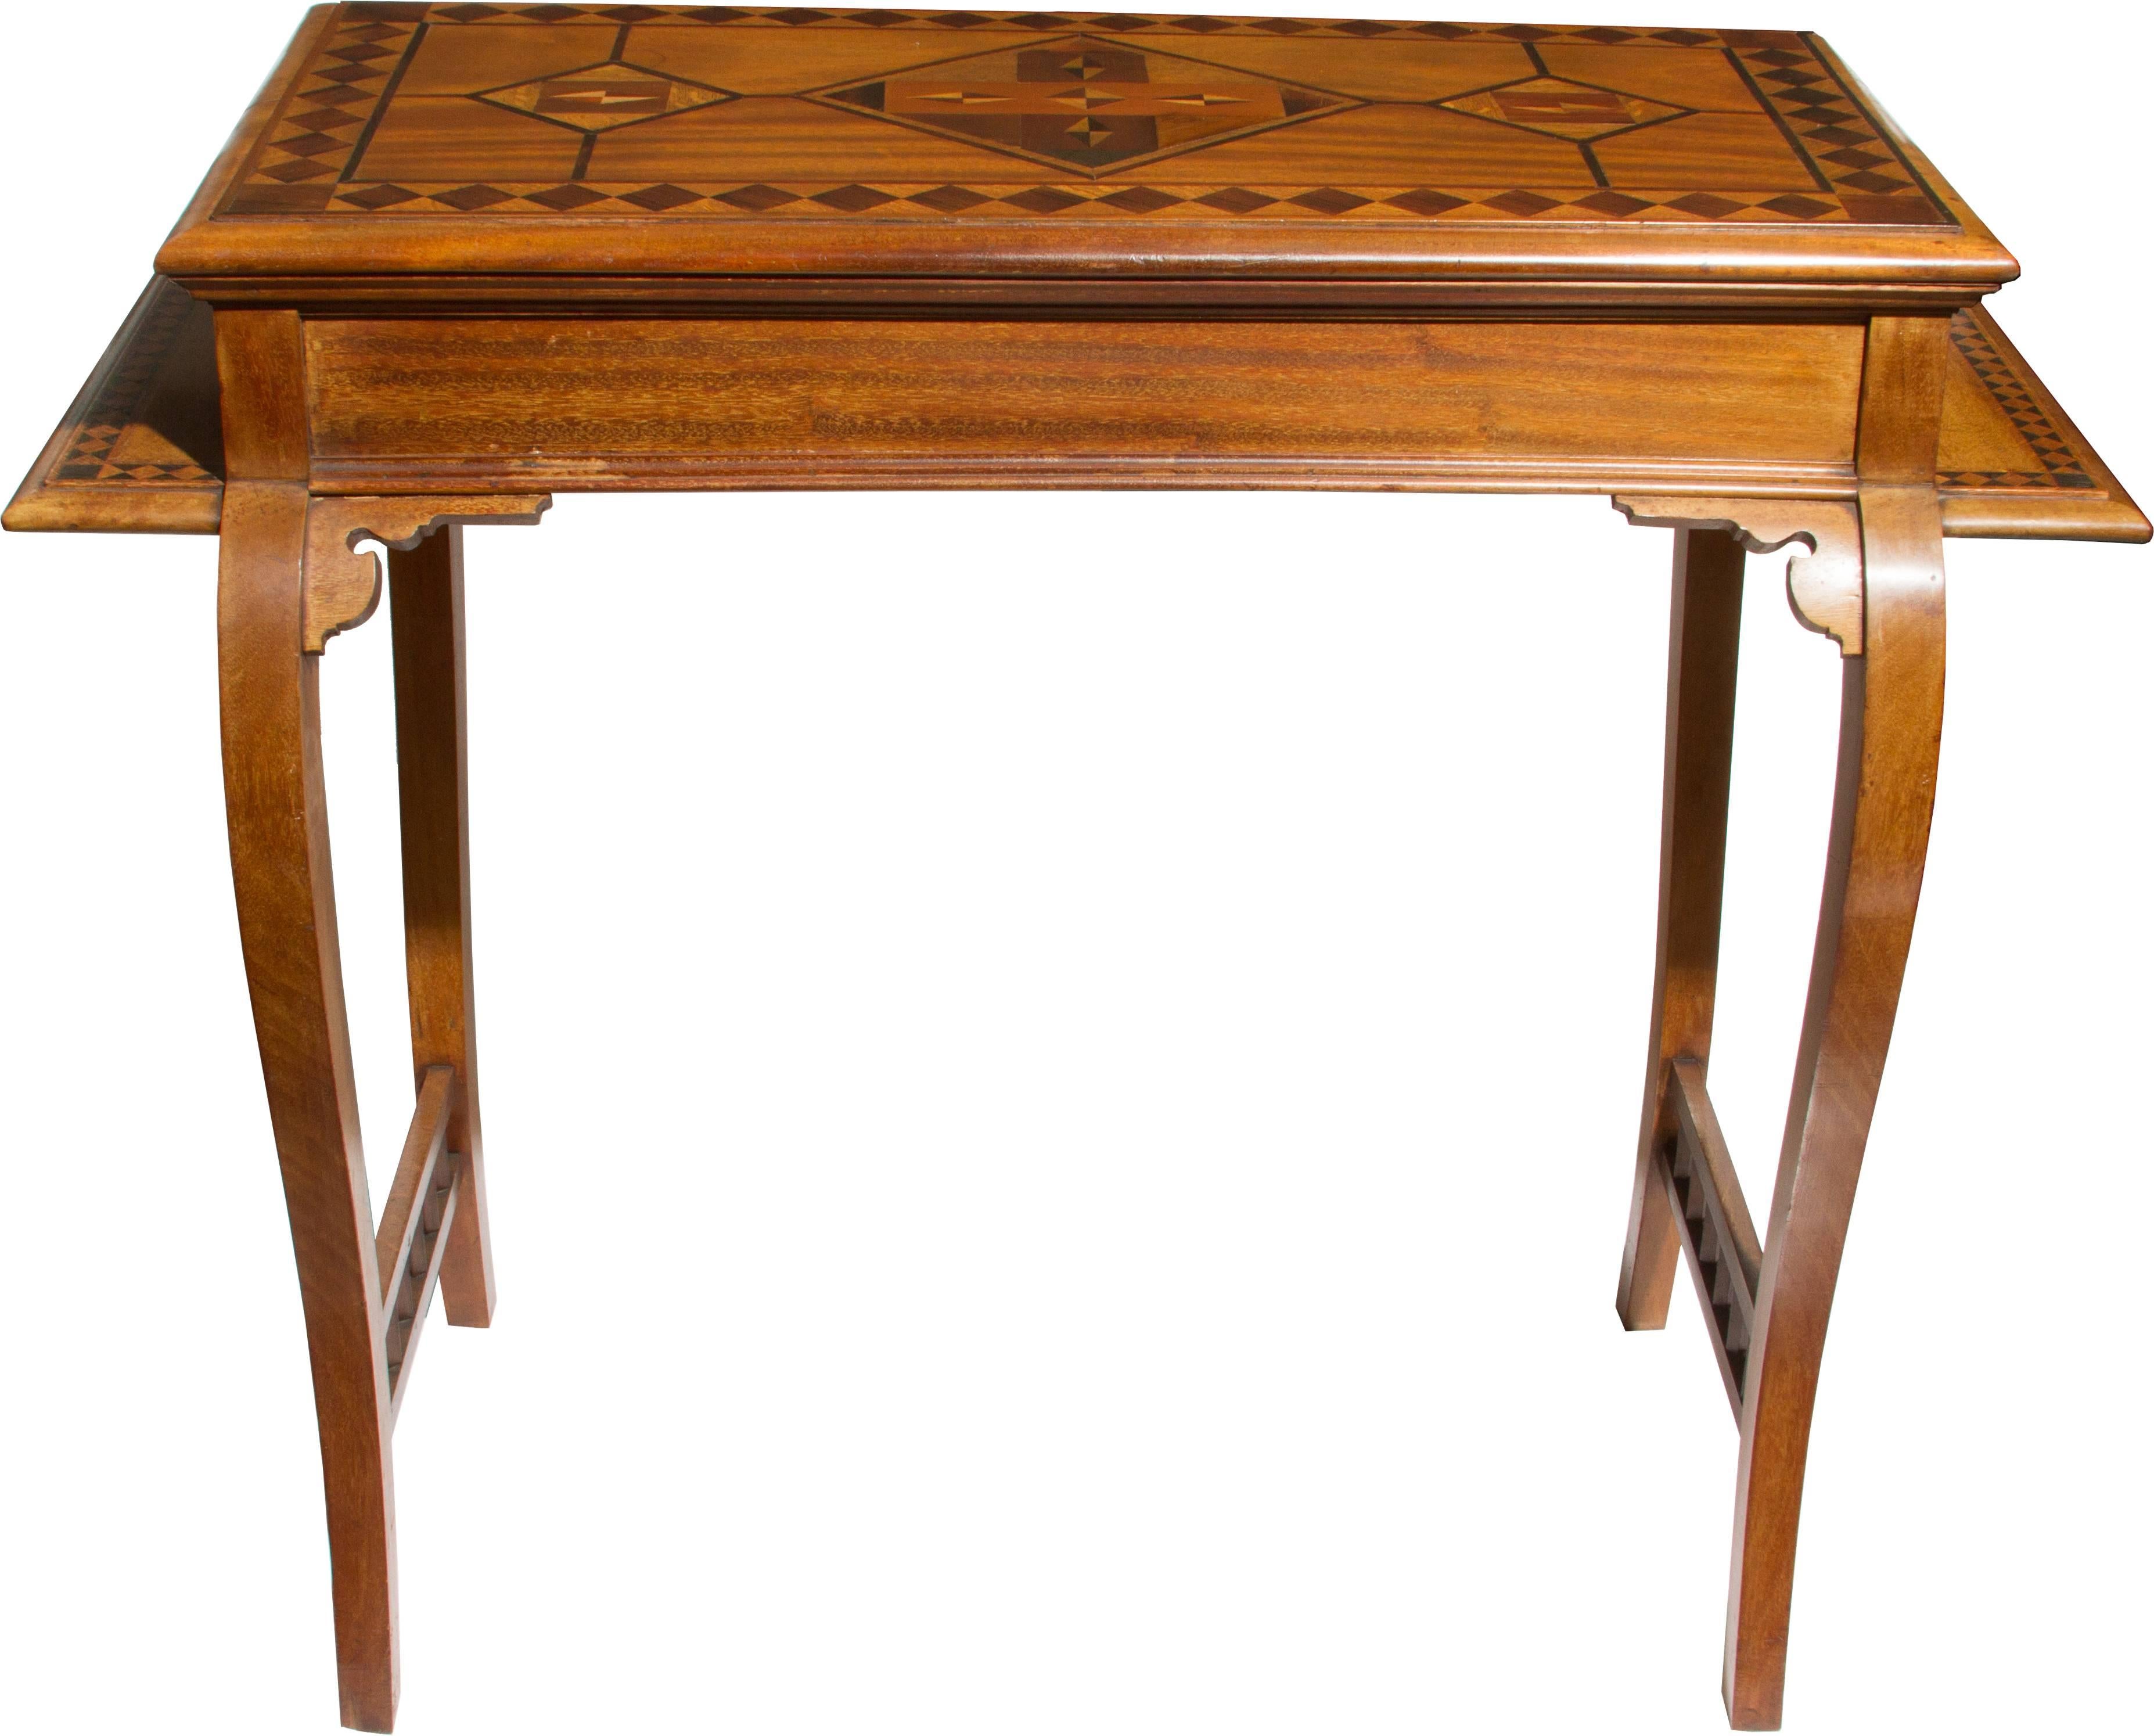 This handsome table has an interesting shape with an inlaid design on the side shelves as well as the top and fretwork between the legs.